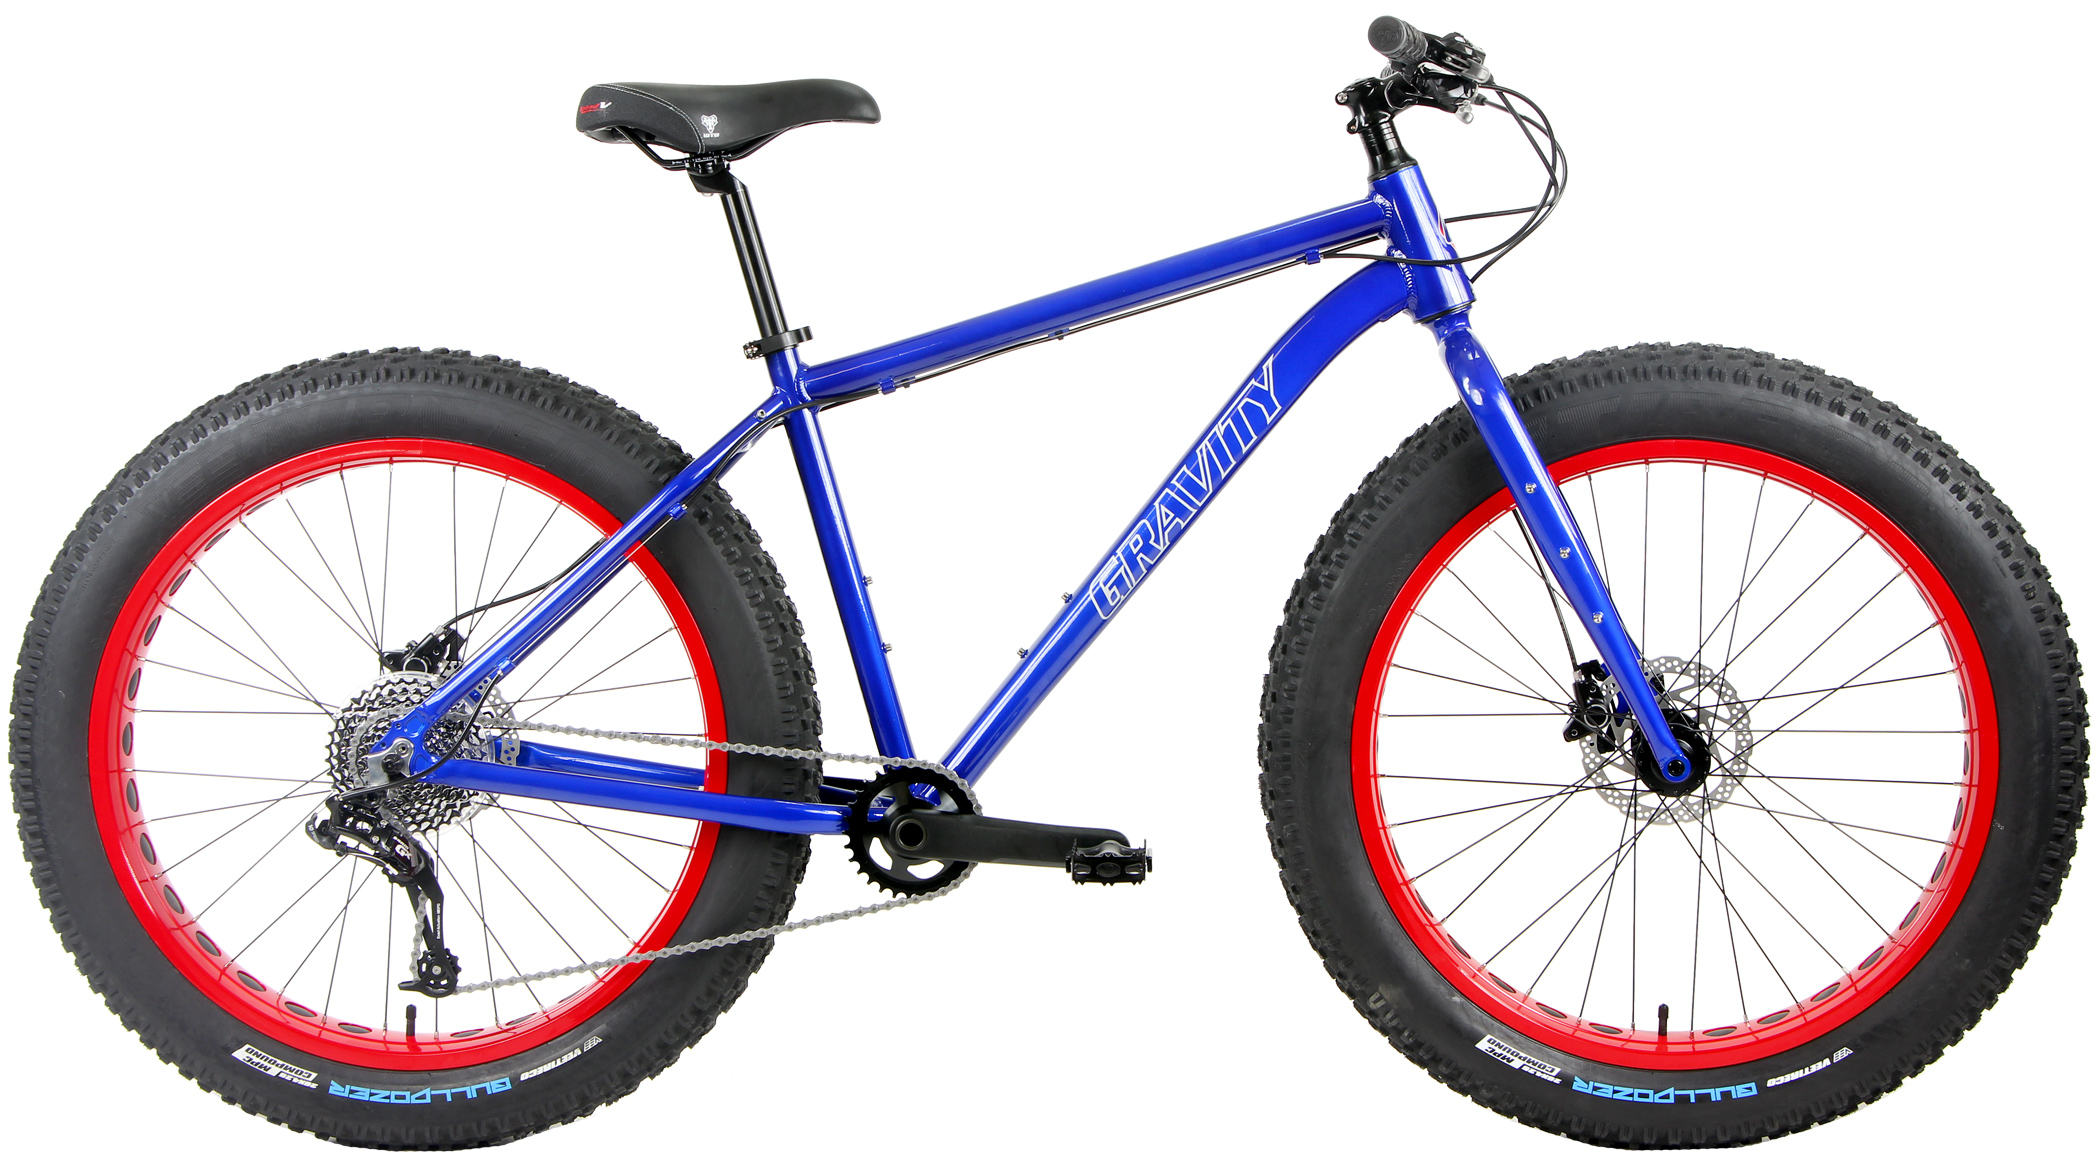 Save up to 60% off new Fat Bikes - Gravity 2018 Bullseye Monster 